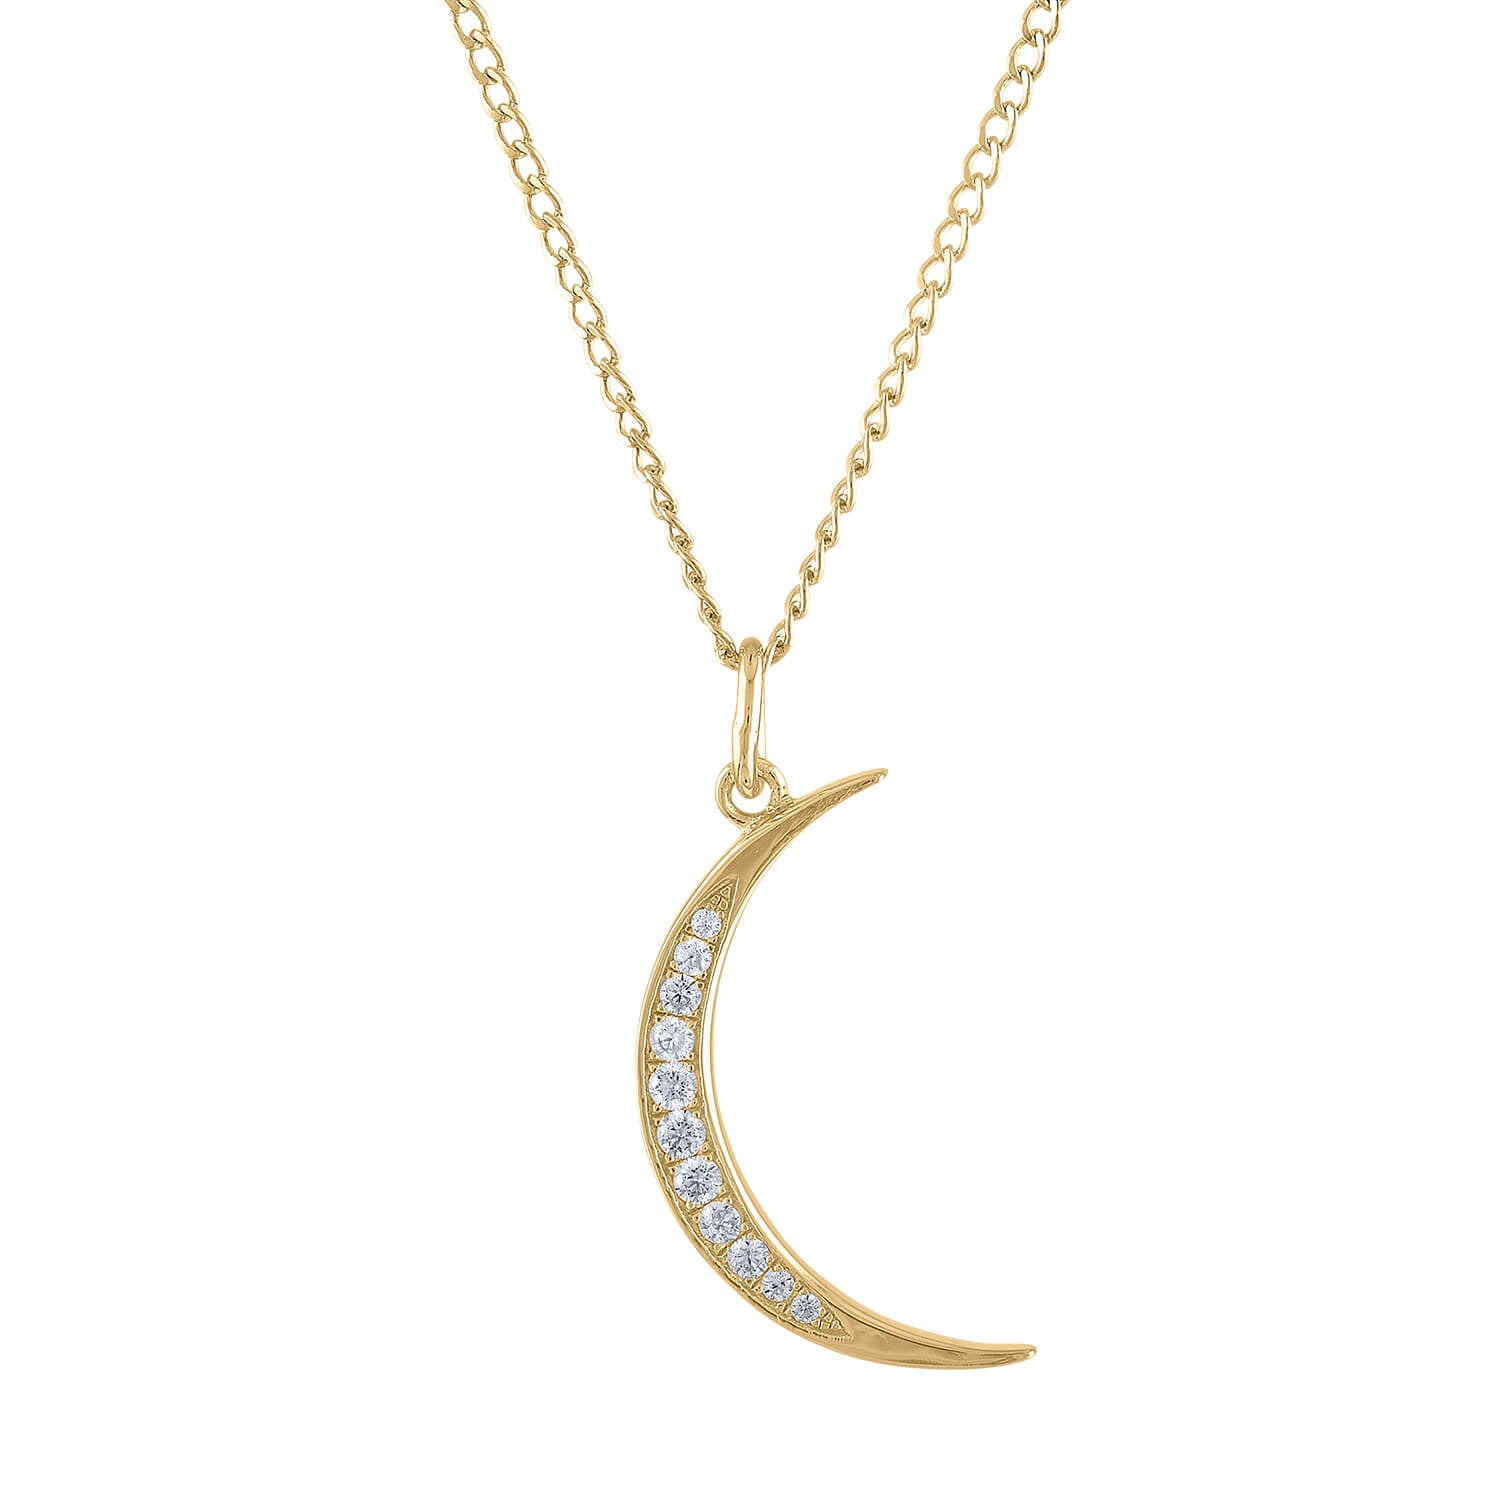 Pave Moon Charm Necklace in Gold